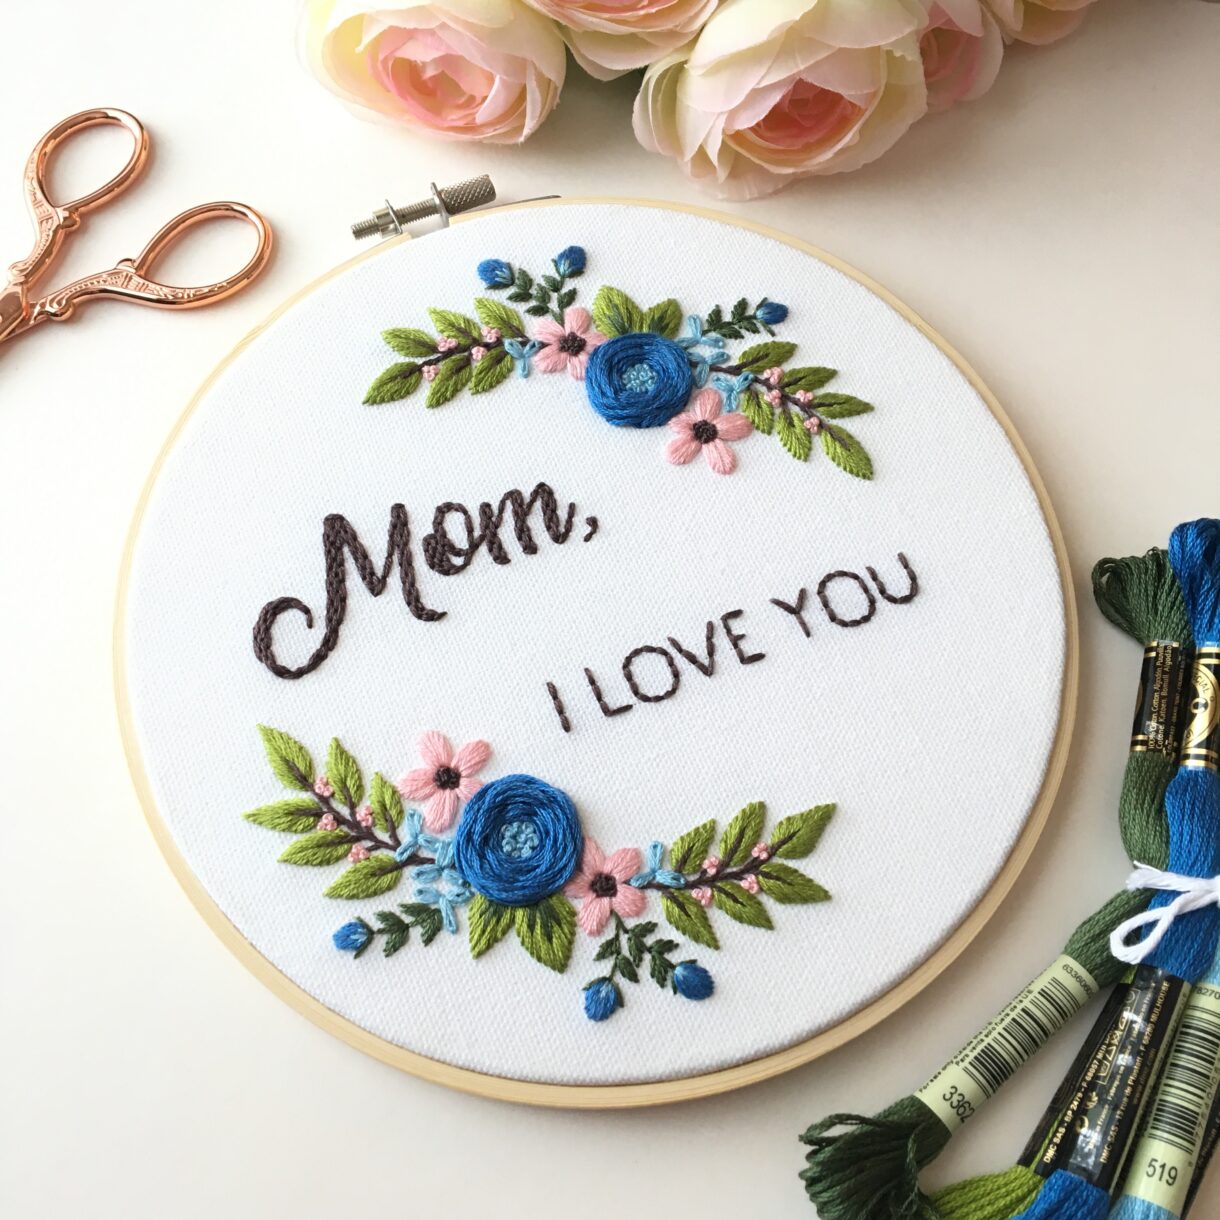 picture of hand embroidered florals in wreath with the words "Mom, I love you" in the center